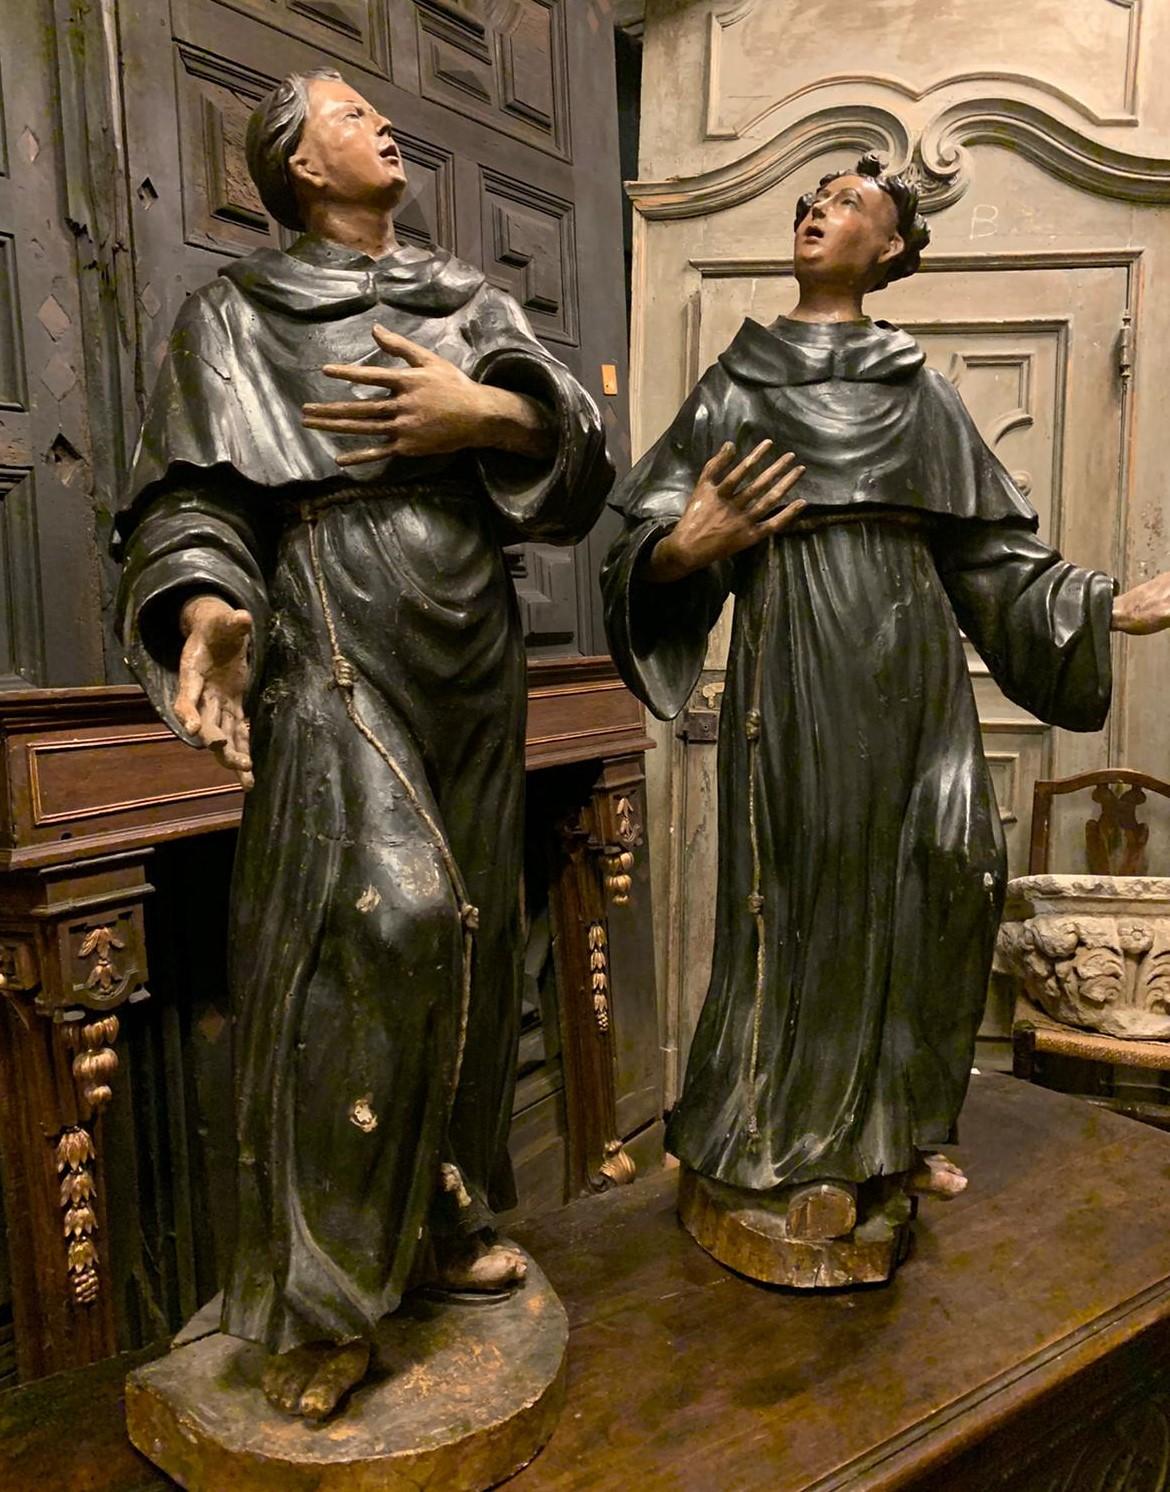 Ancient pair of 2 statues of Dominican friars, full-height, carved in solid wood and hand painted, the wonderful details of the recognizable late 17th century tunics, built in Italy, are hollow inside so as not to make them weigh too much. They have